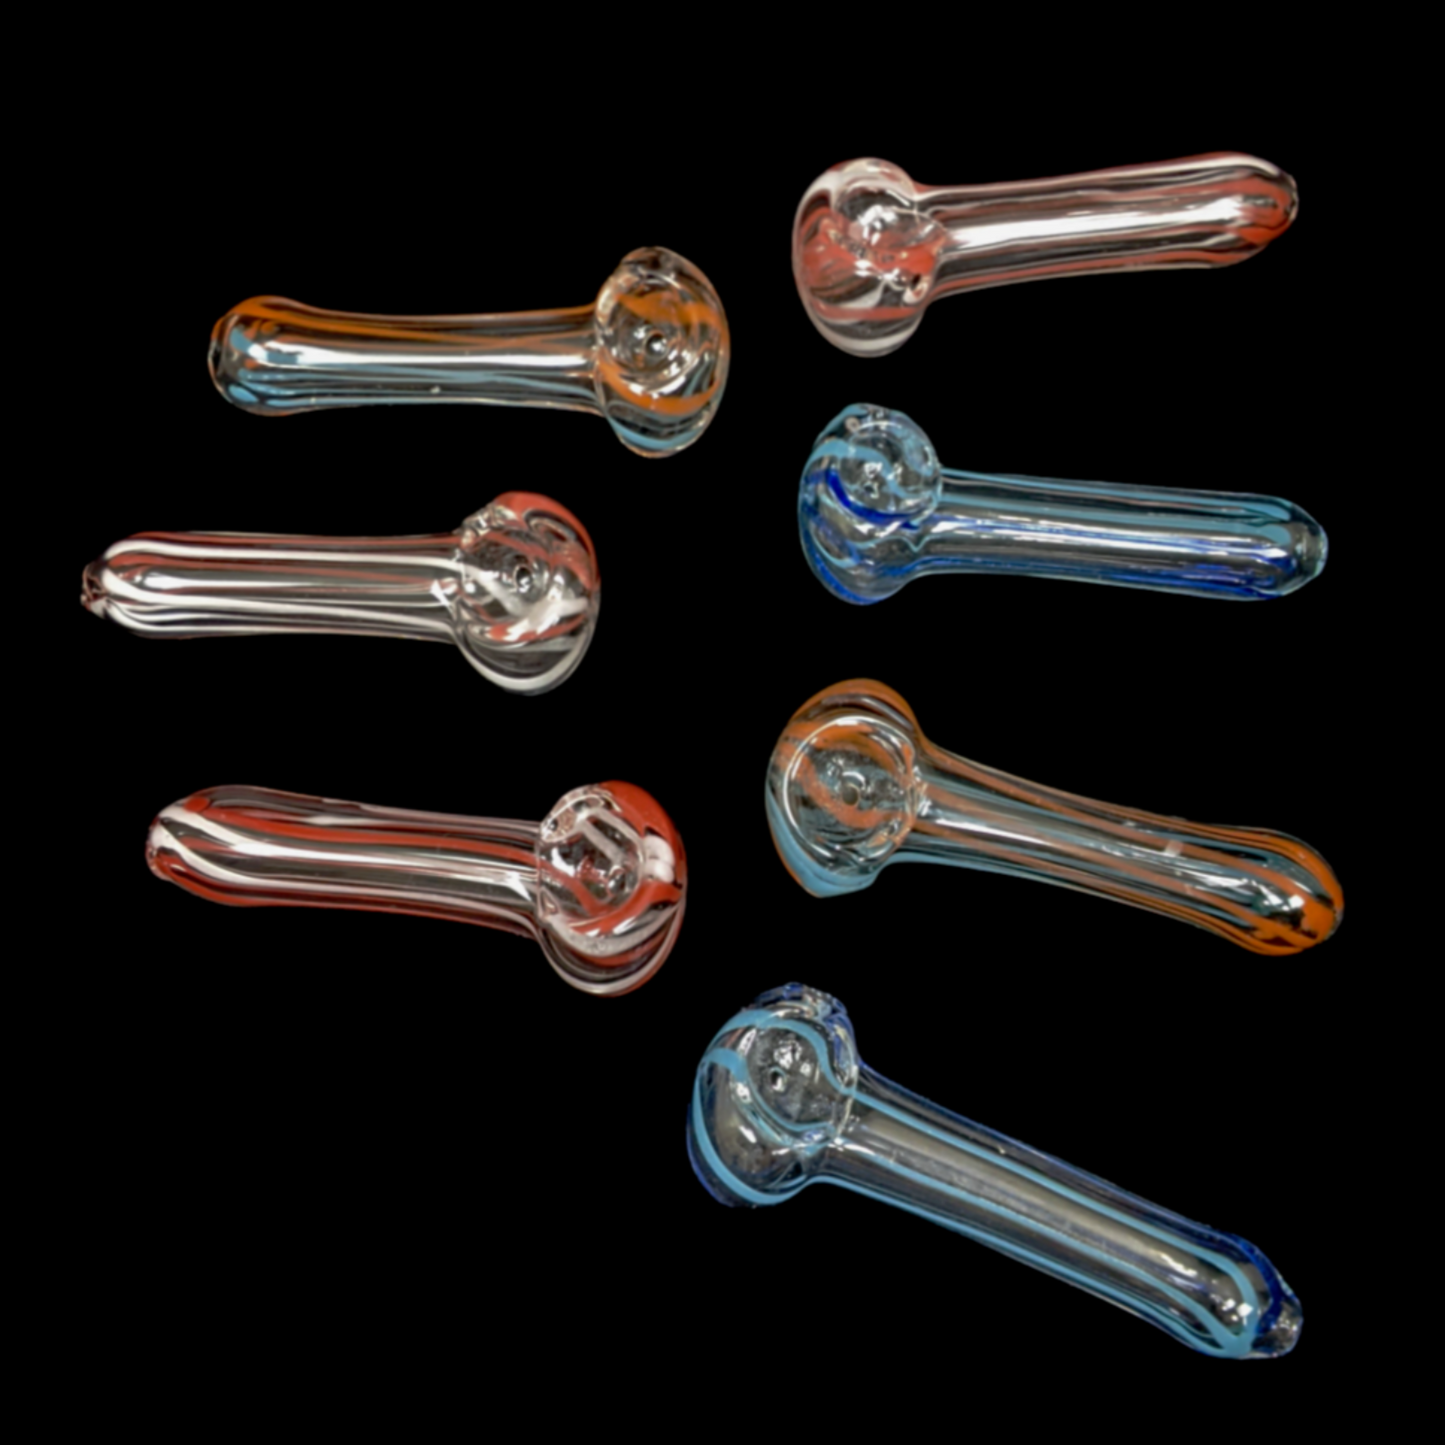 2.5"-3" Smoking Tobacco Hand Pipe Clear Glass Borosilicate Small Pipe & Bowl